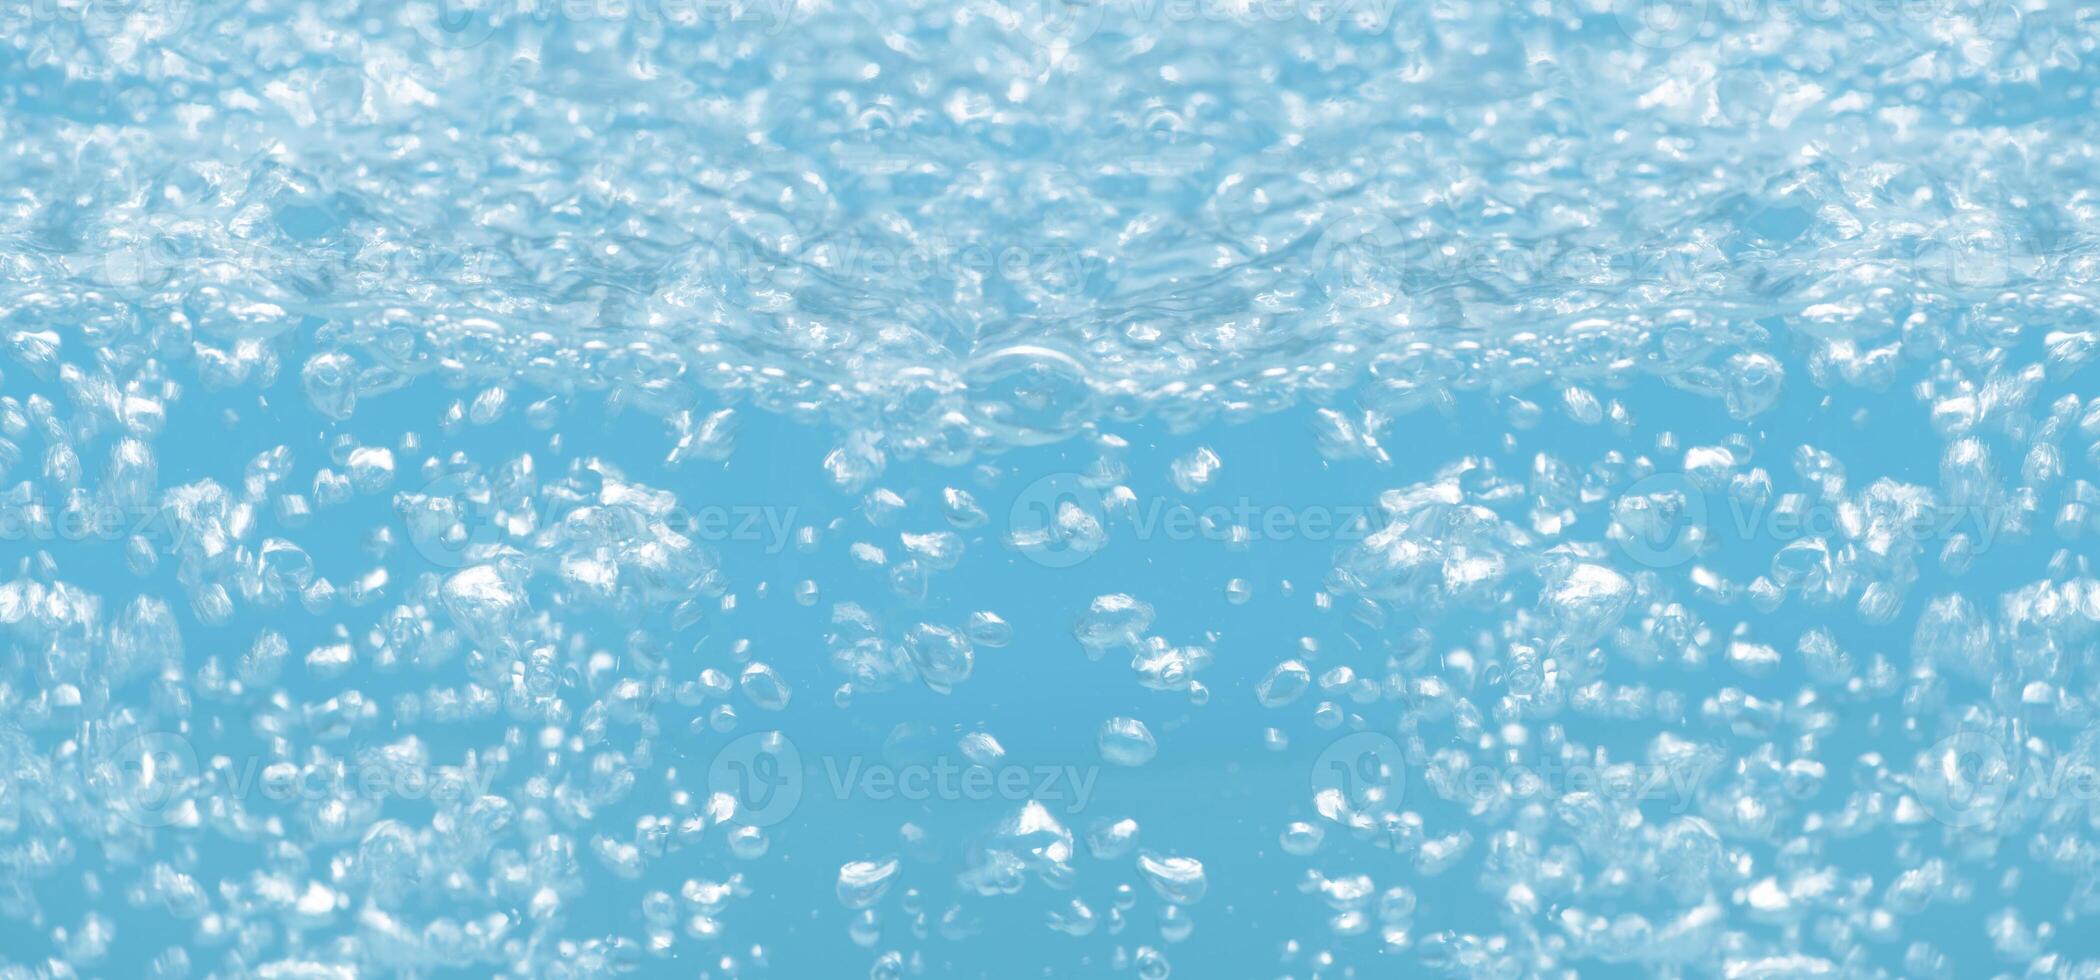 Blue water surface texture with ripples, splashes, and bubbles. Abstract summer banner background Water waves in sunlight with copy space cosmetic moisturizer micellar toner emulsion. Blue water wave. photo